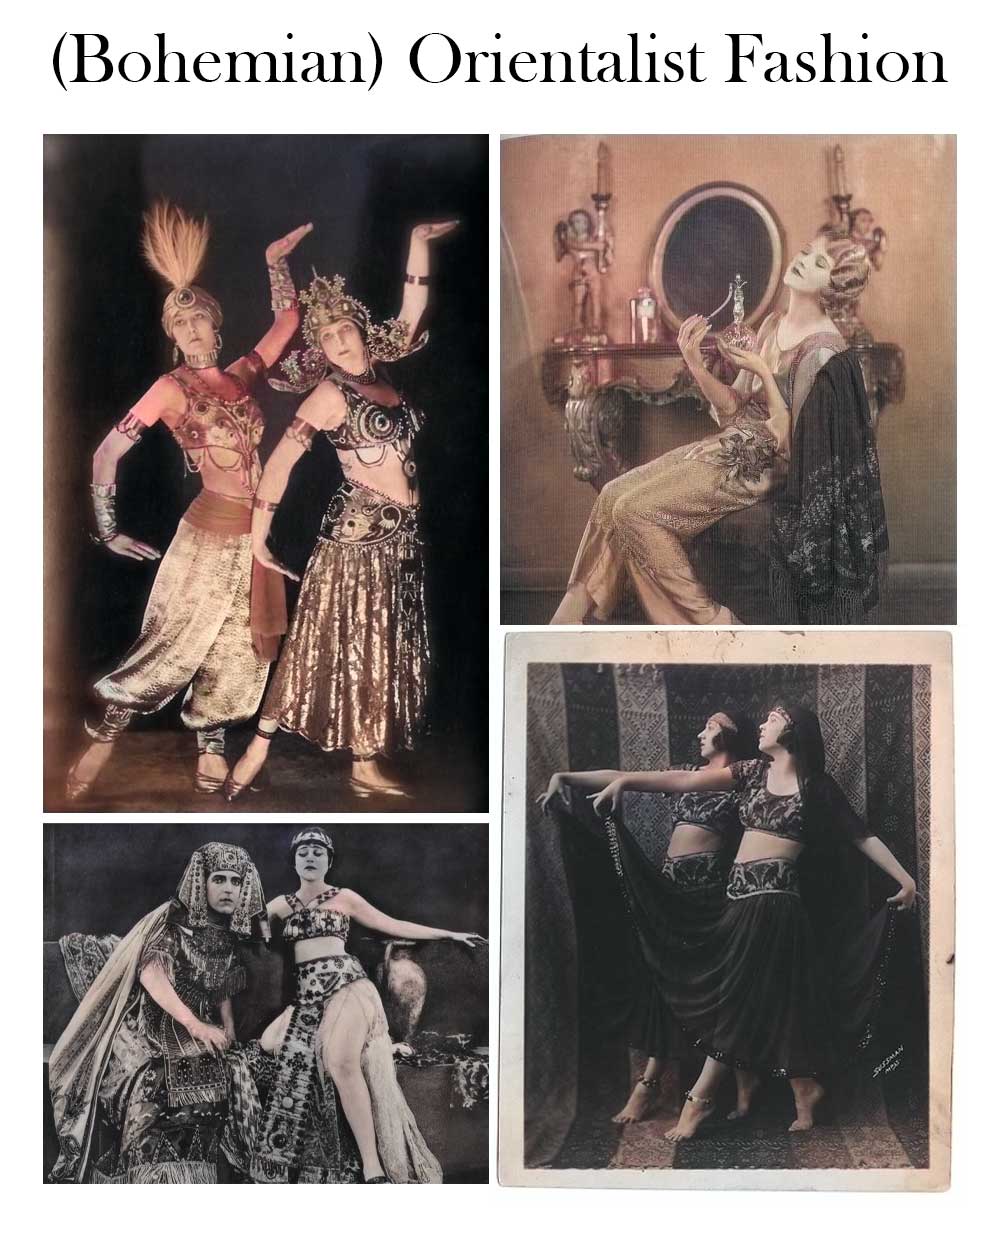 The Ballets Russes Orientalist fashion with bohemian aesthetic 